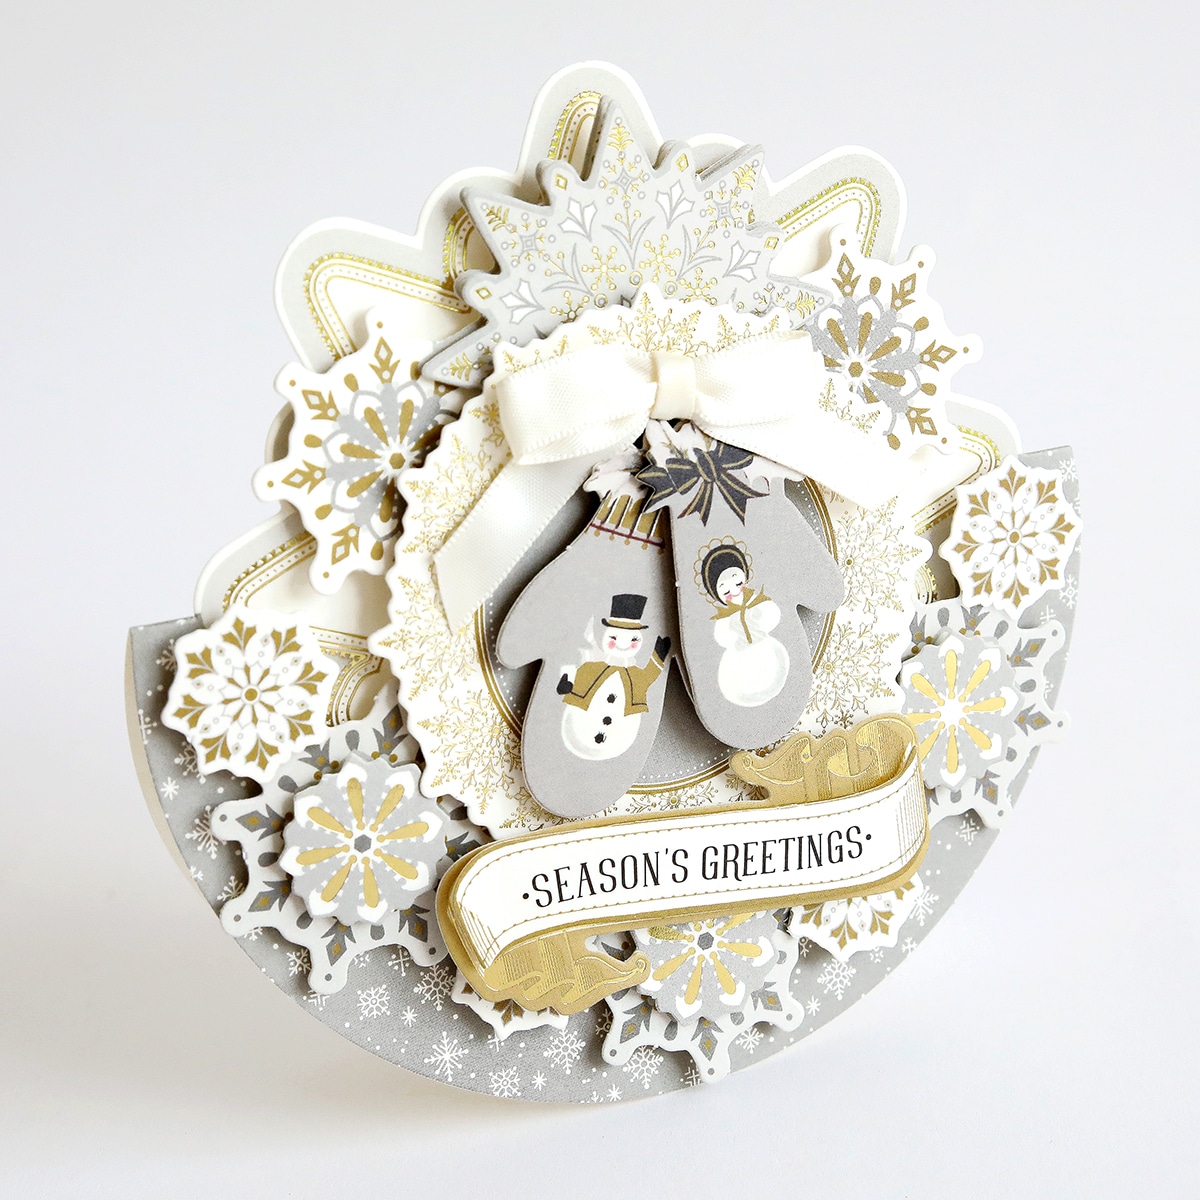 A christmas card with snowflakes and mittens.